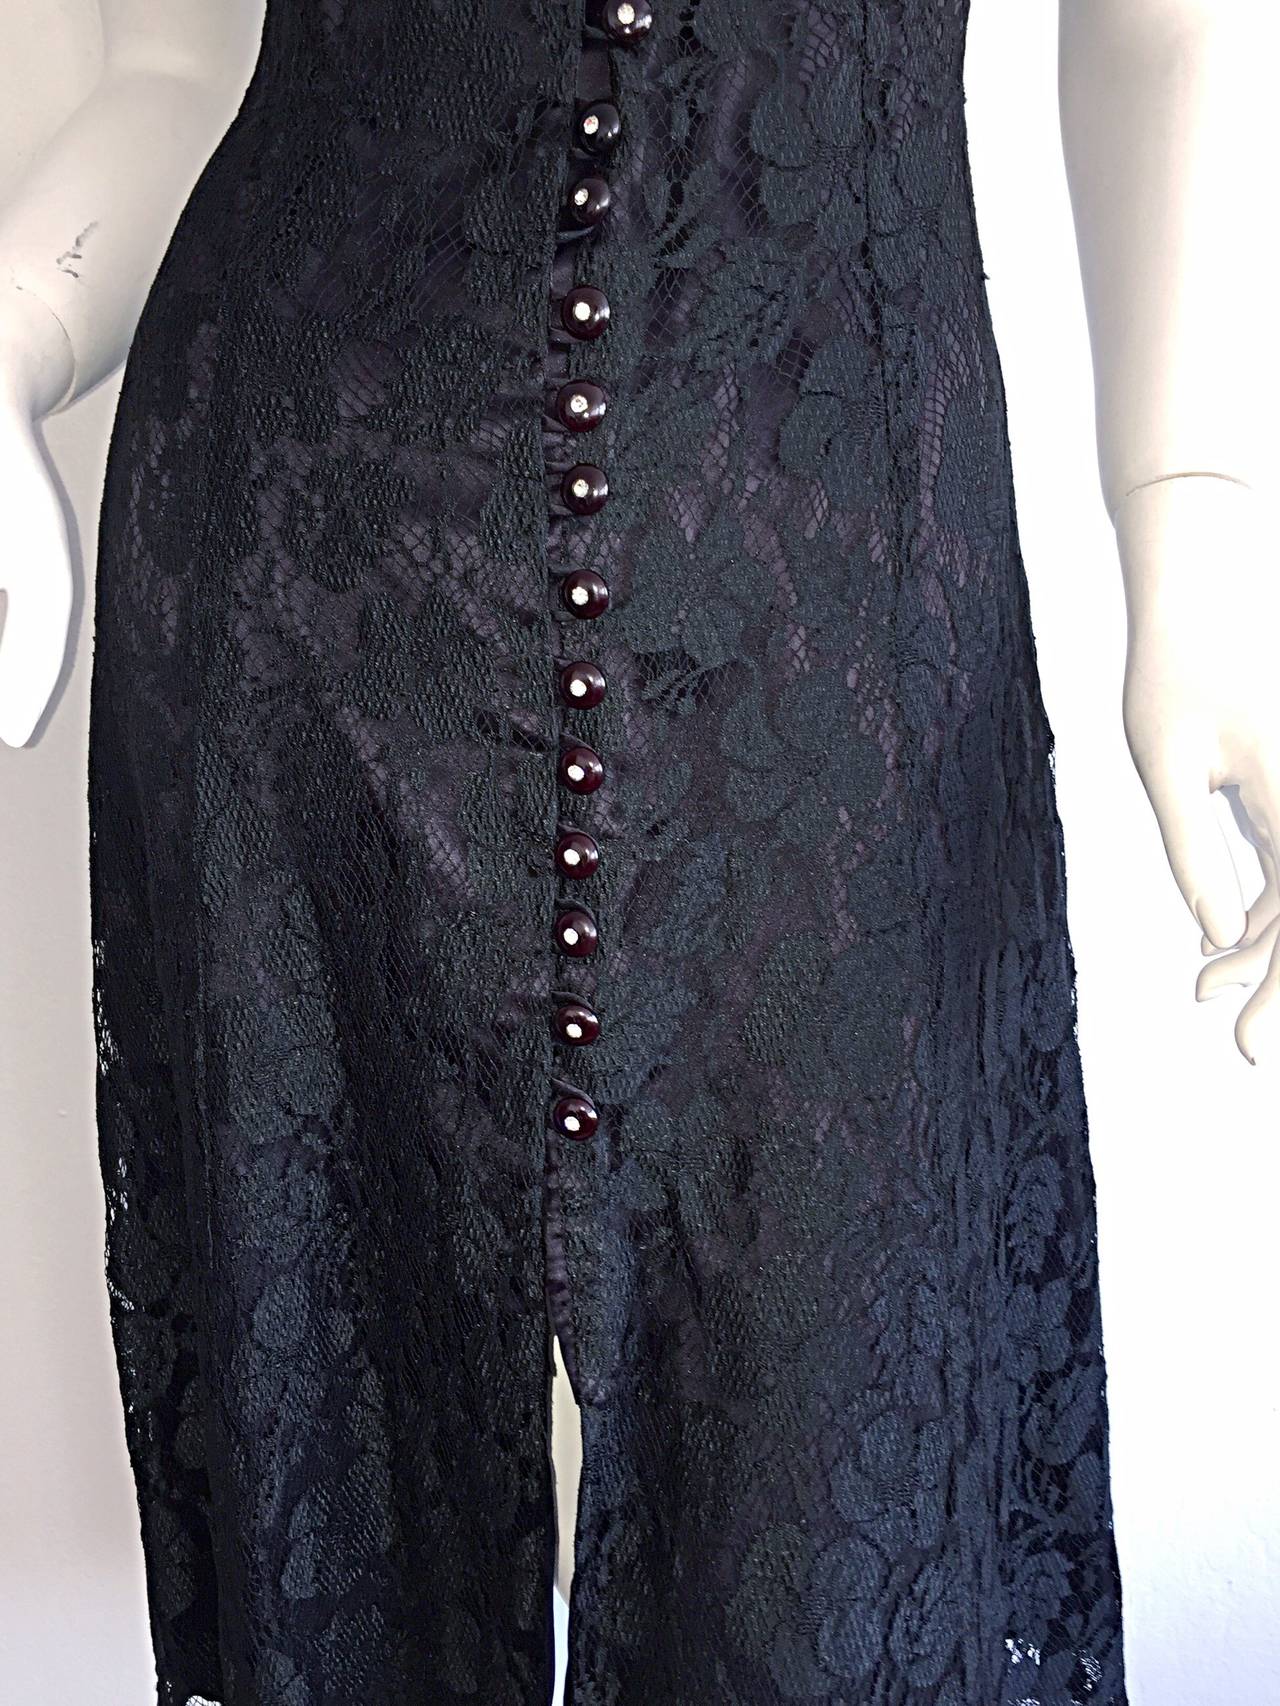 Paco Rabbane 1990s Black Lace Babydoll Dressw/ Rhinestone Buttons For Sale 4